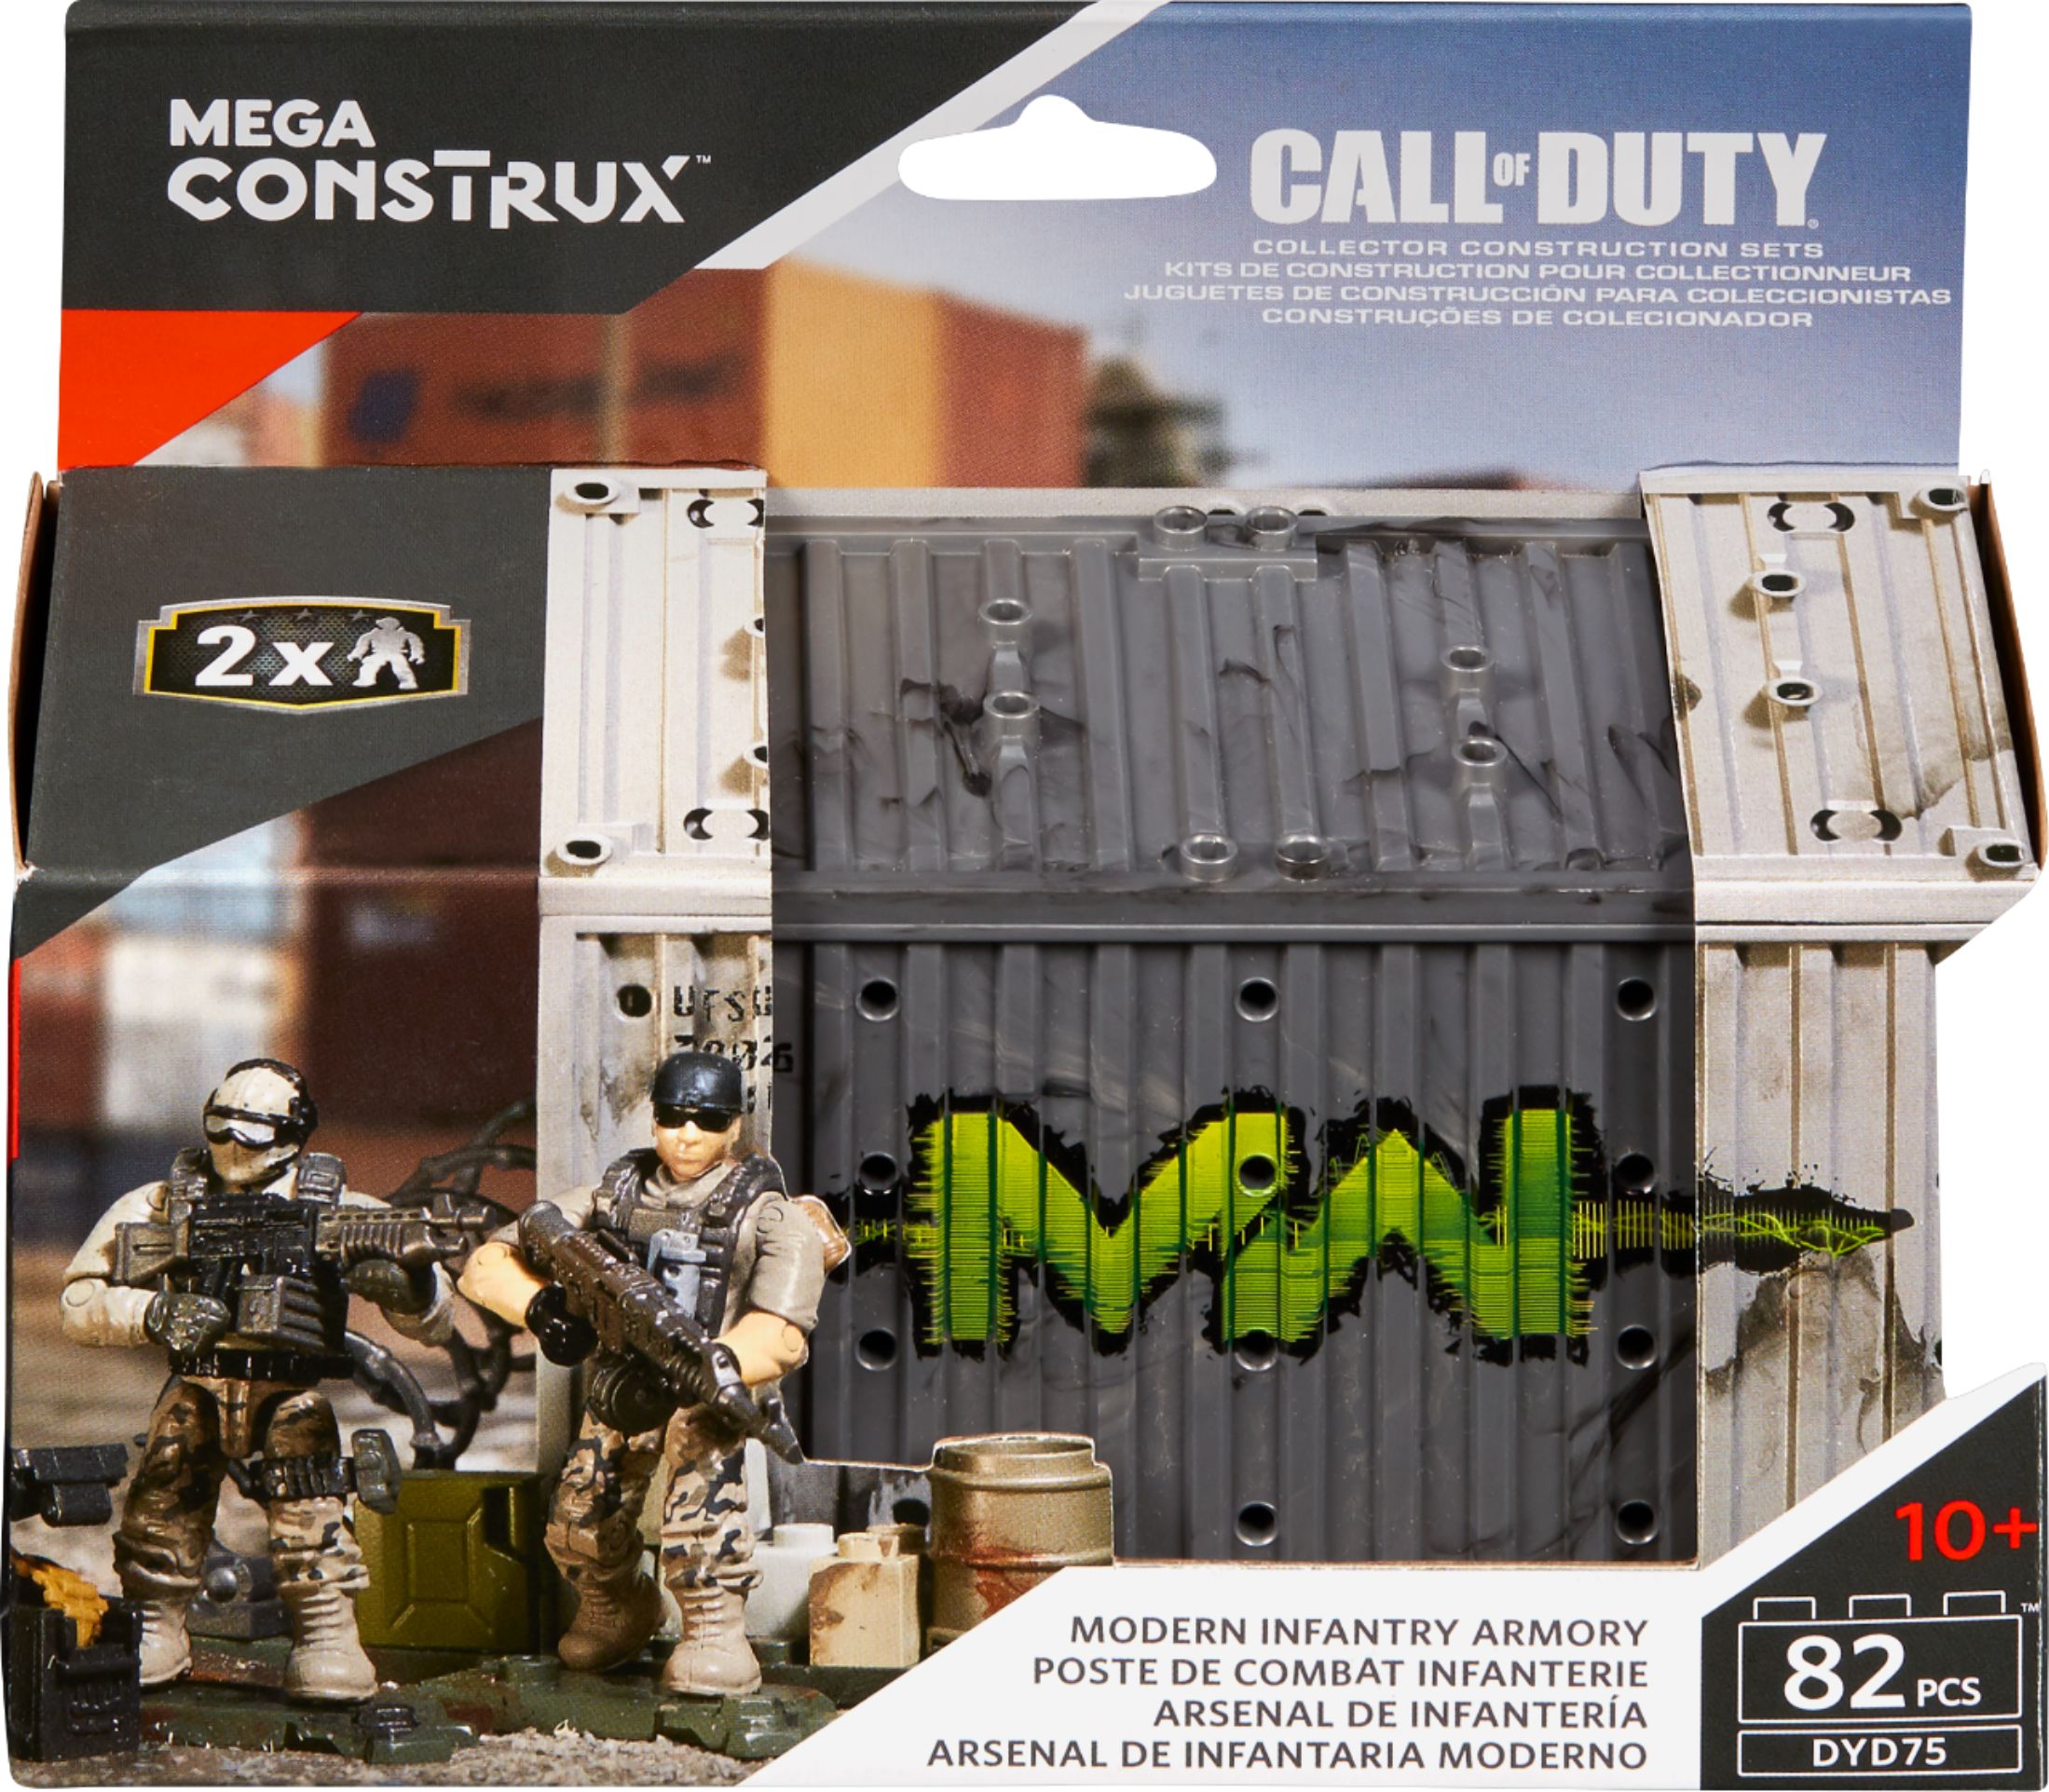 Mega Construx Call of Duty WWII Armory Shipmen Container Building Set FVG02 